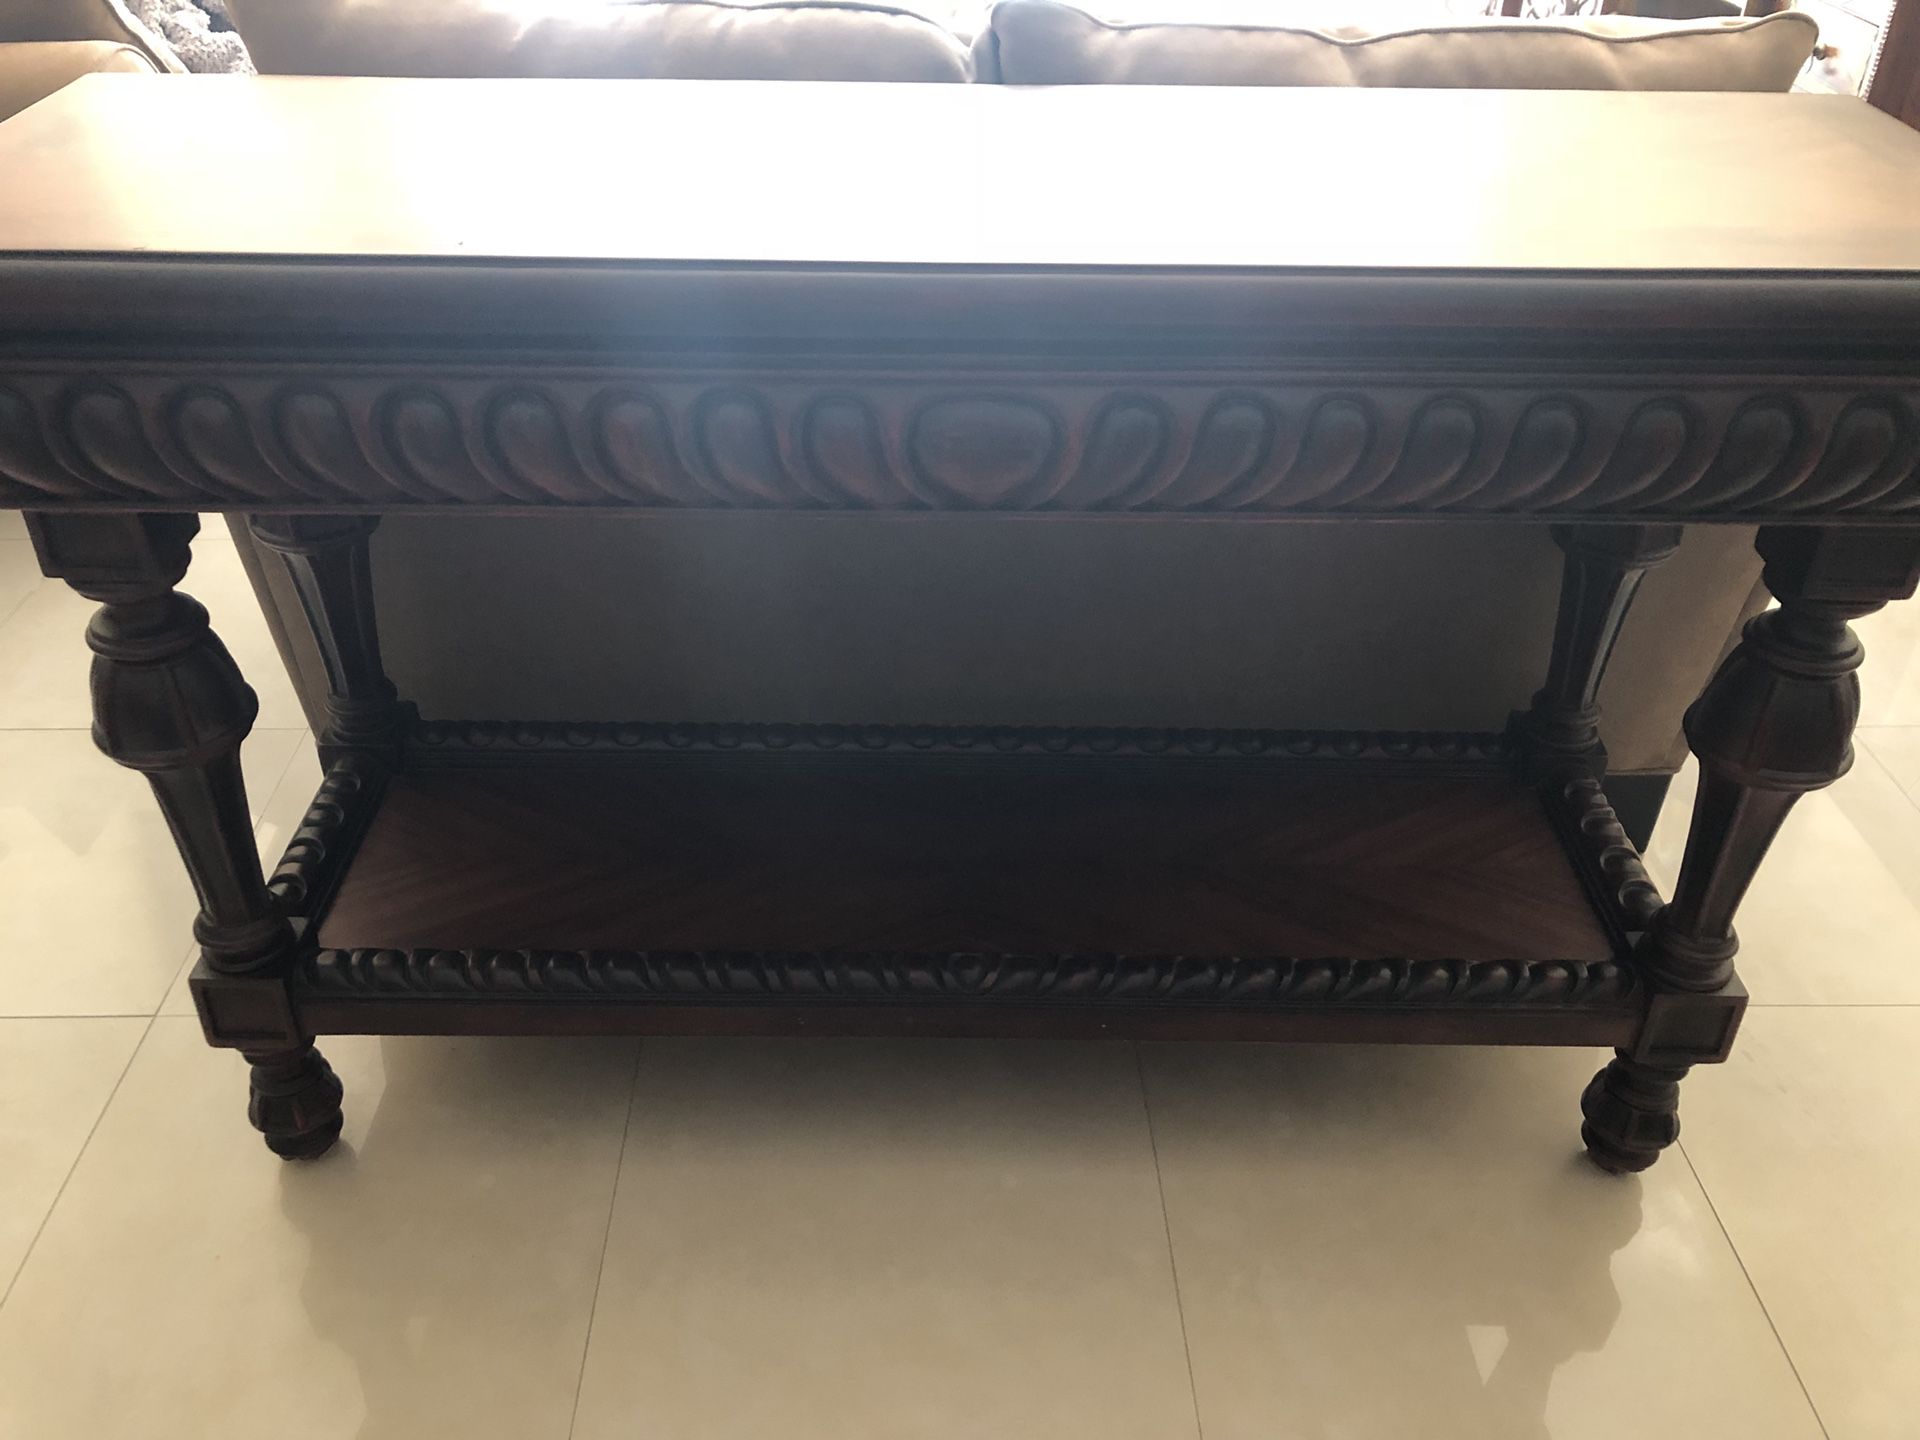 59 1/2” long solid wood table w/ carved features.